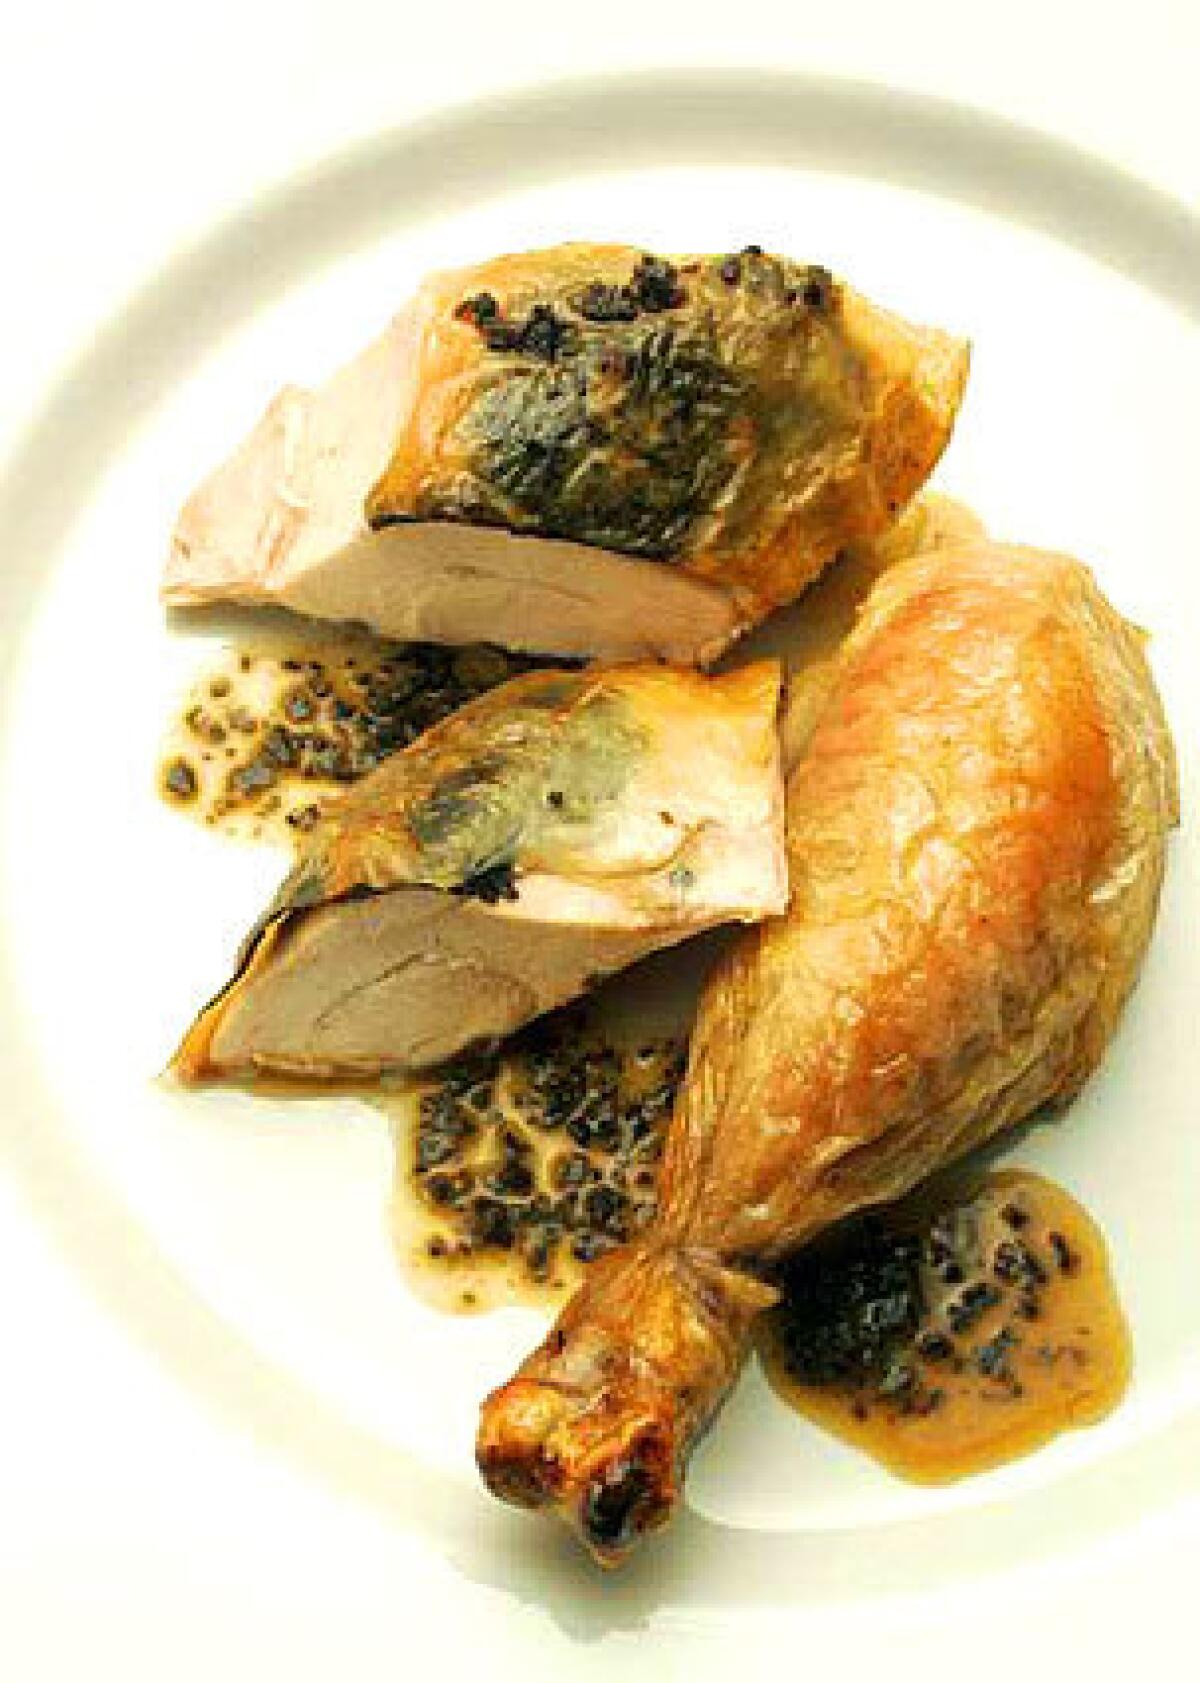 Roasted chicken with truffles and truffle butter.